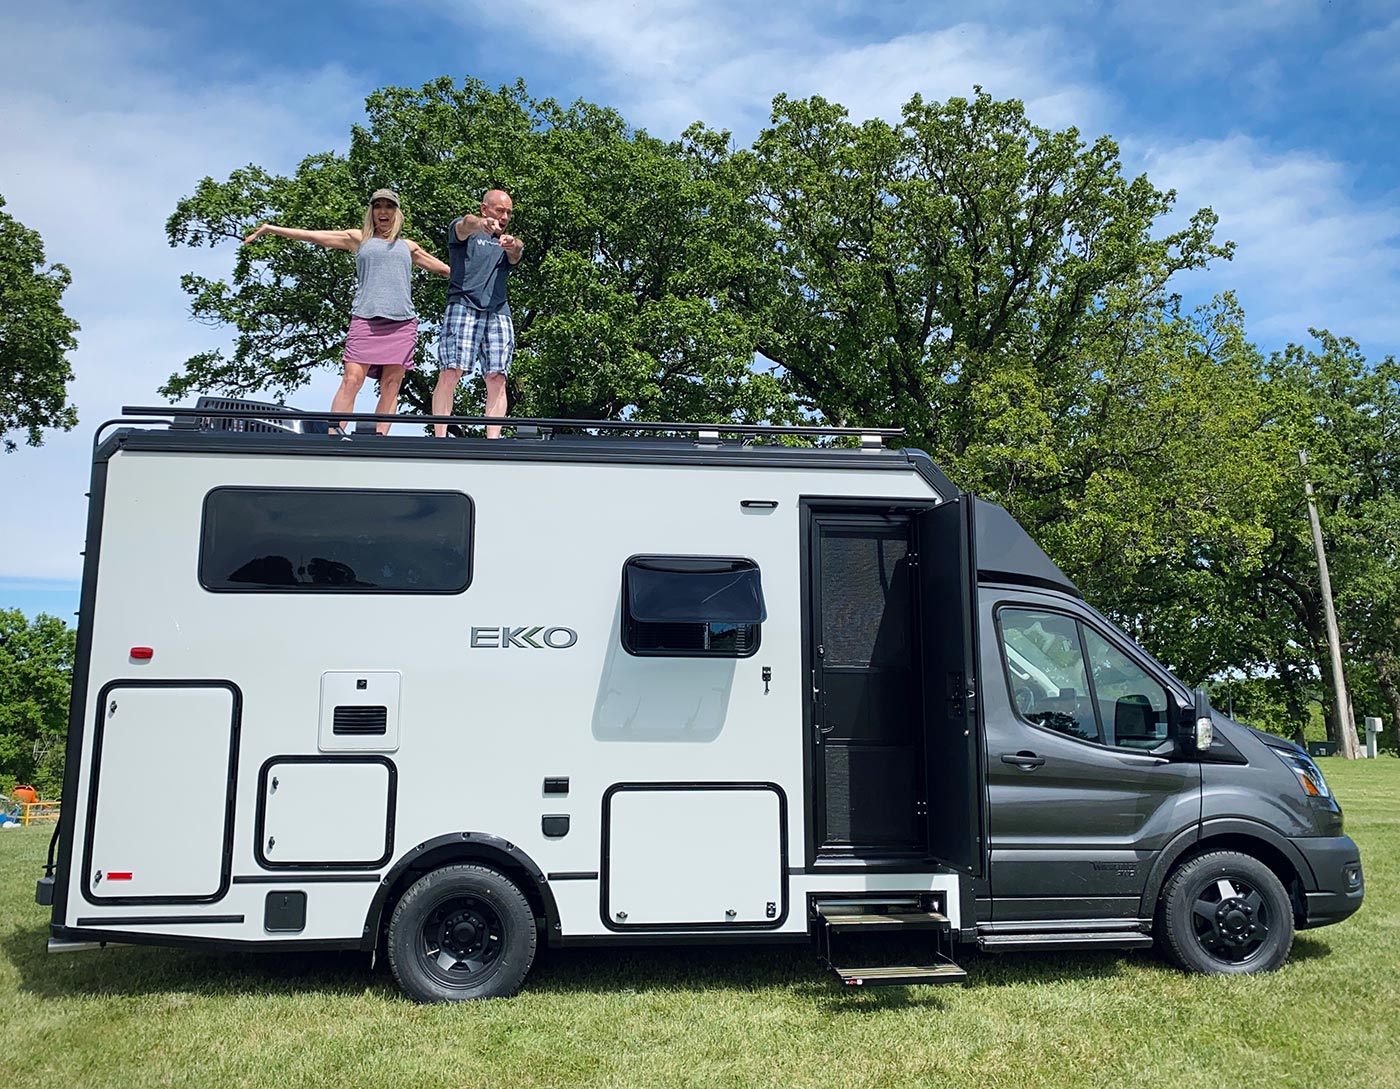 Two adults, a man and a women stand on top of their 2022 Winnebago EKKO. The RV is parked in a grassy field with trees behind it.